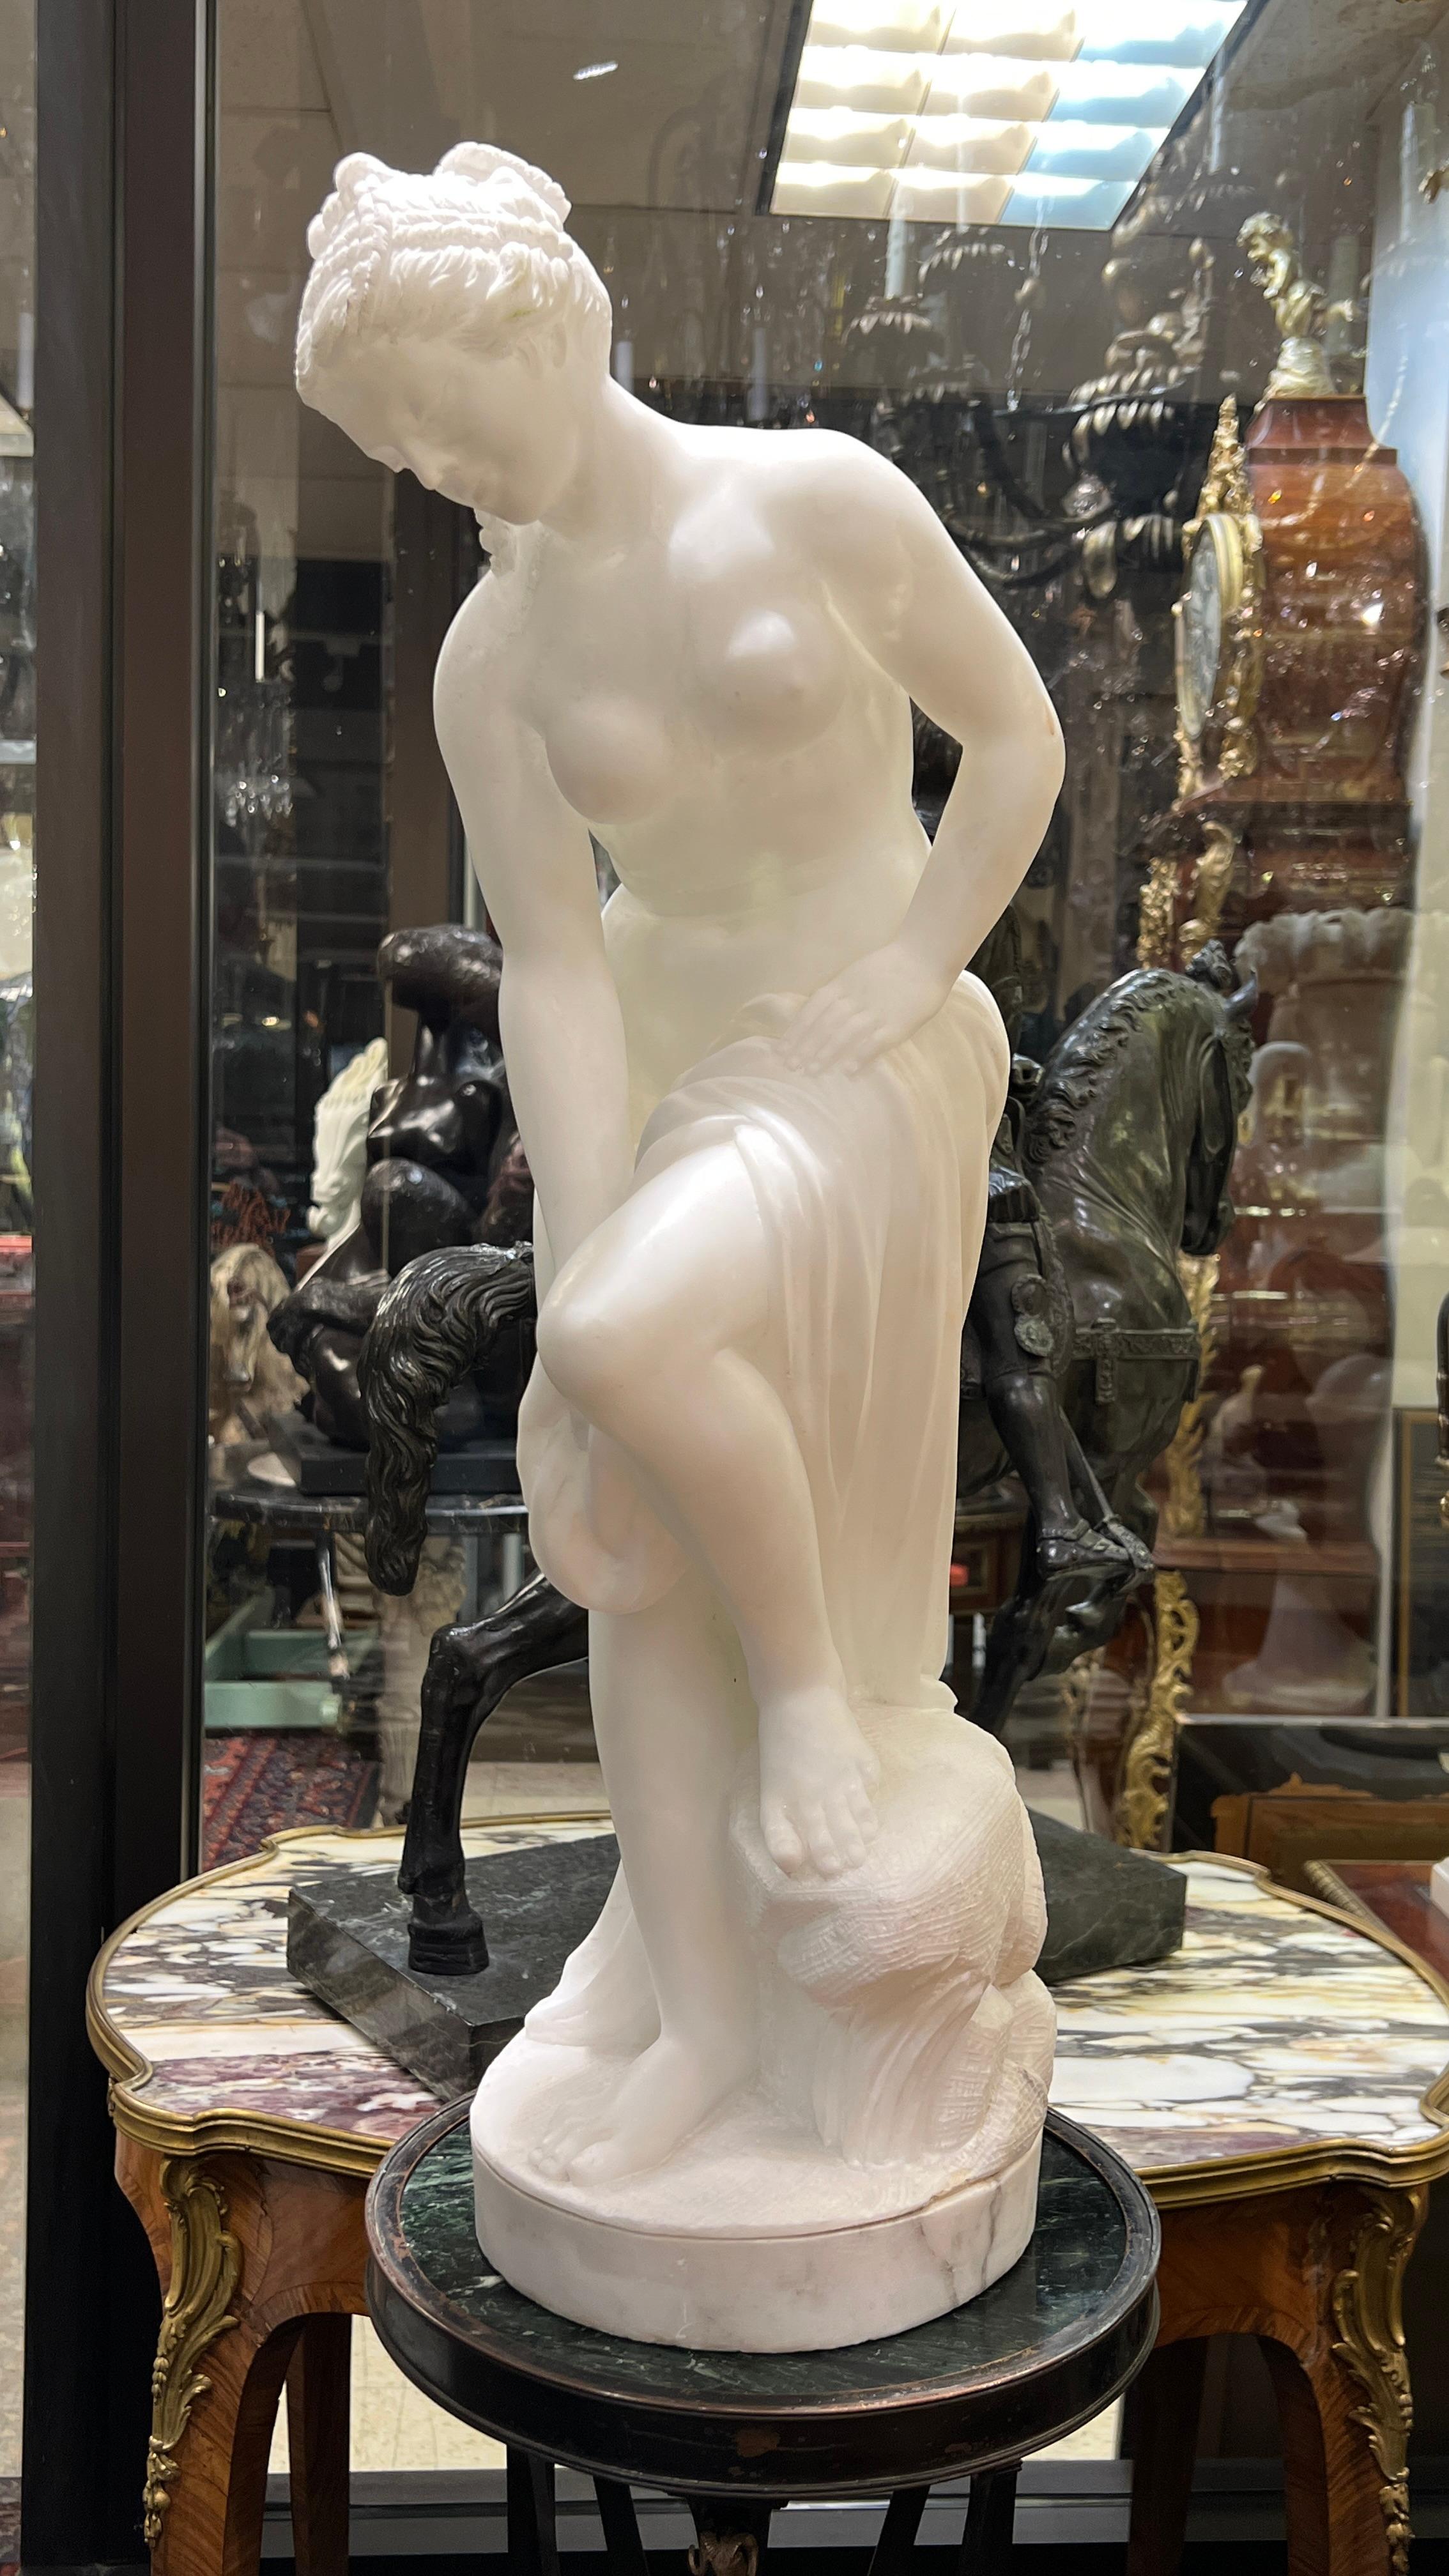 Sculpture depicting a semi-nude female bather in the Roman neoclassical style, finely sculpted from white alabaster stone.  Apparently unsigned.